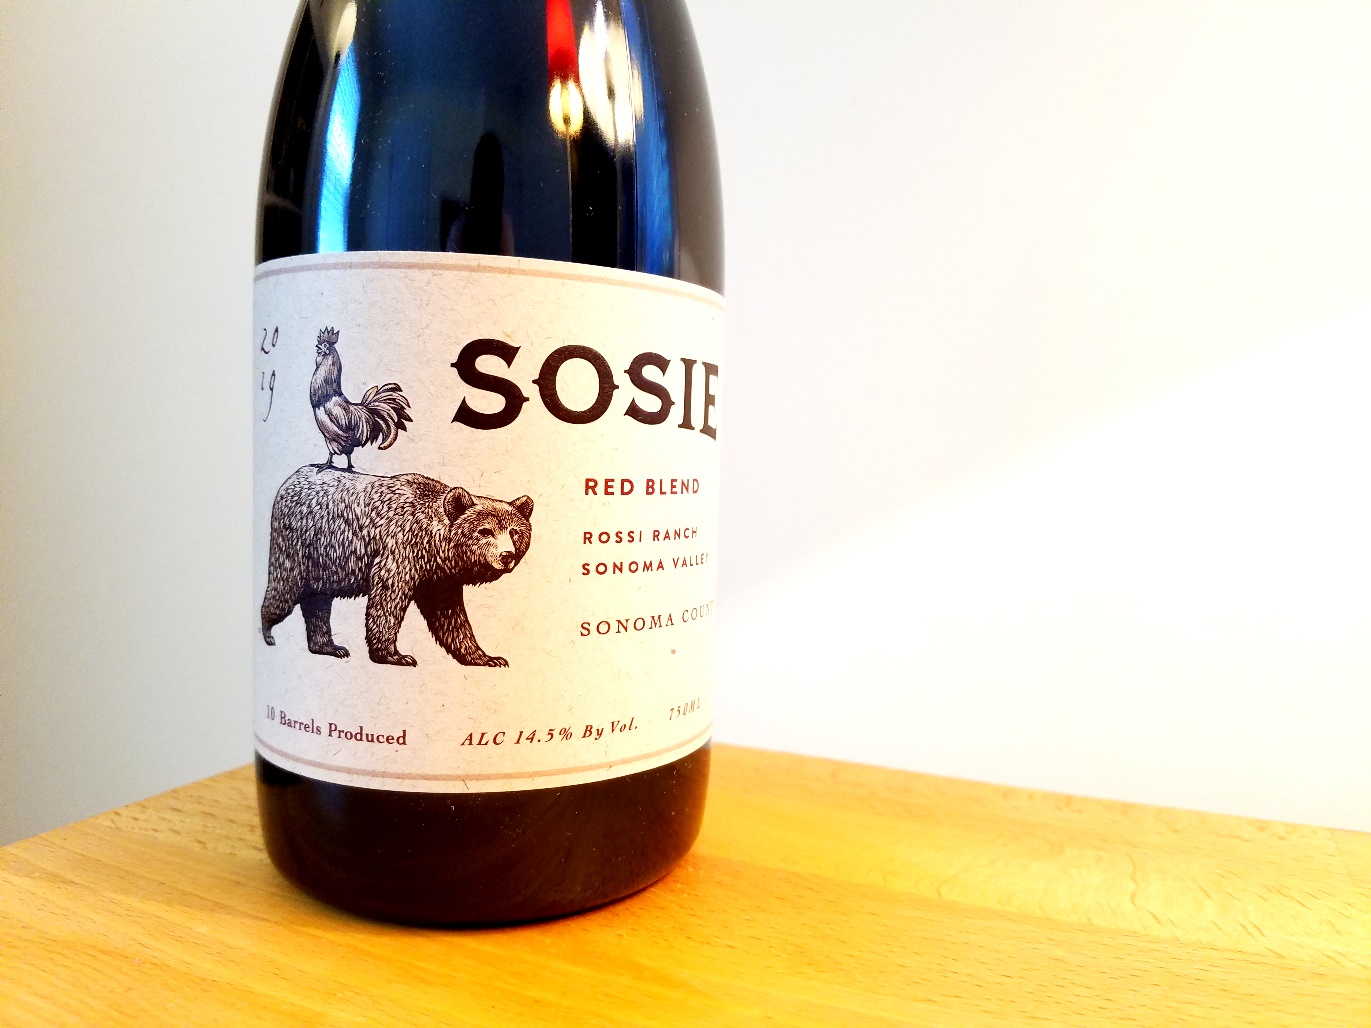 Sosie, Red Blend 2019, Rossi Ranch, Sonoma Valley, California, Wine Casual